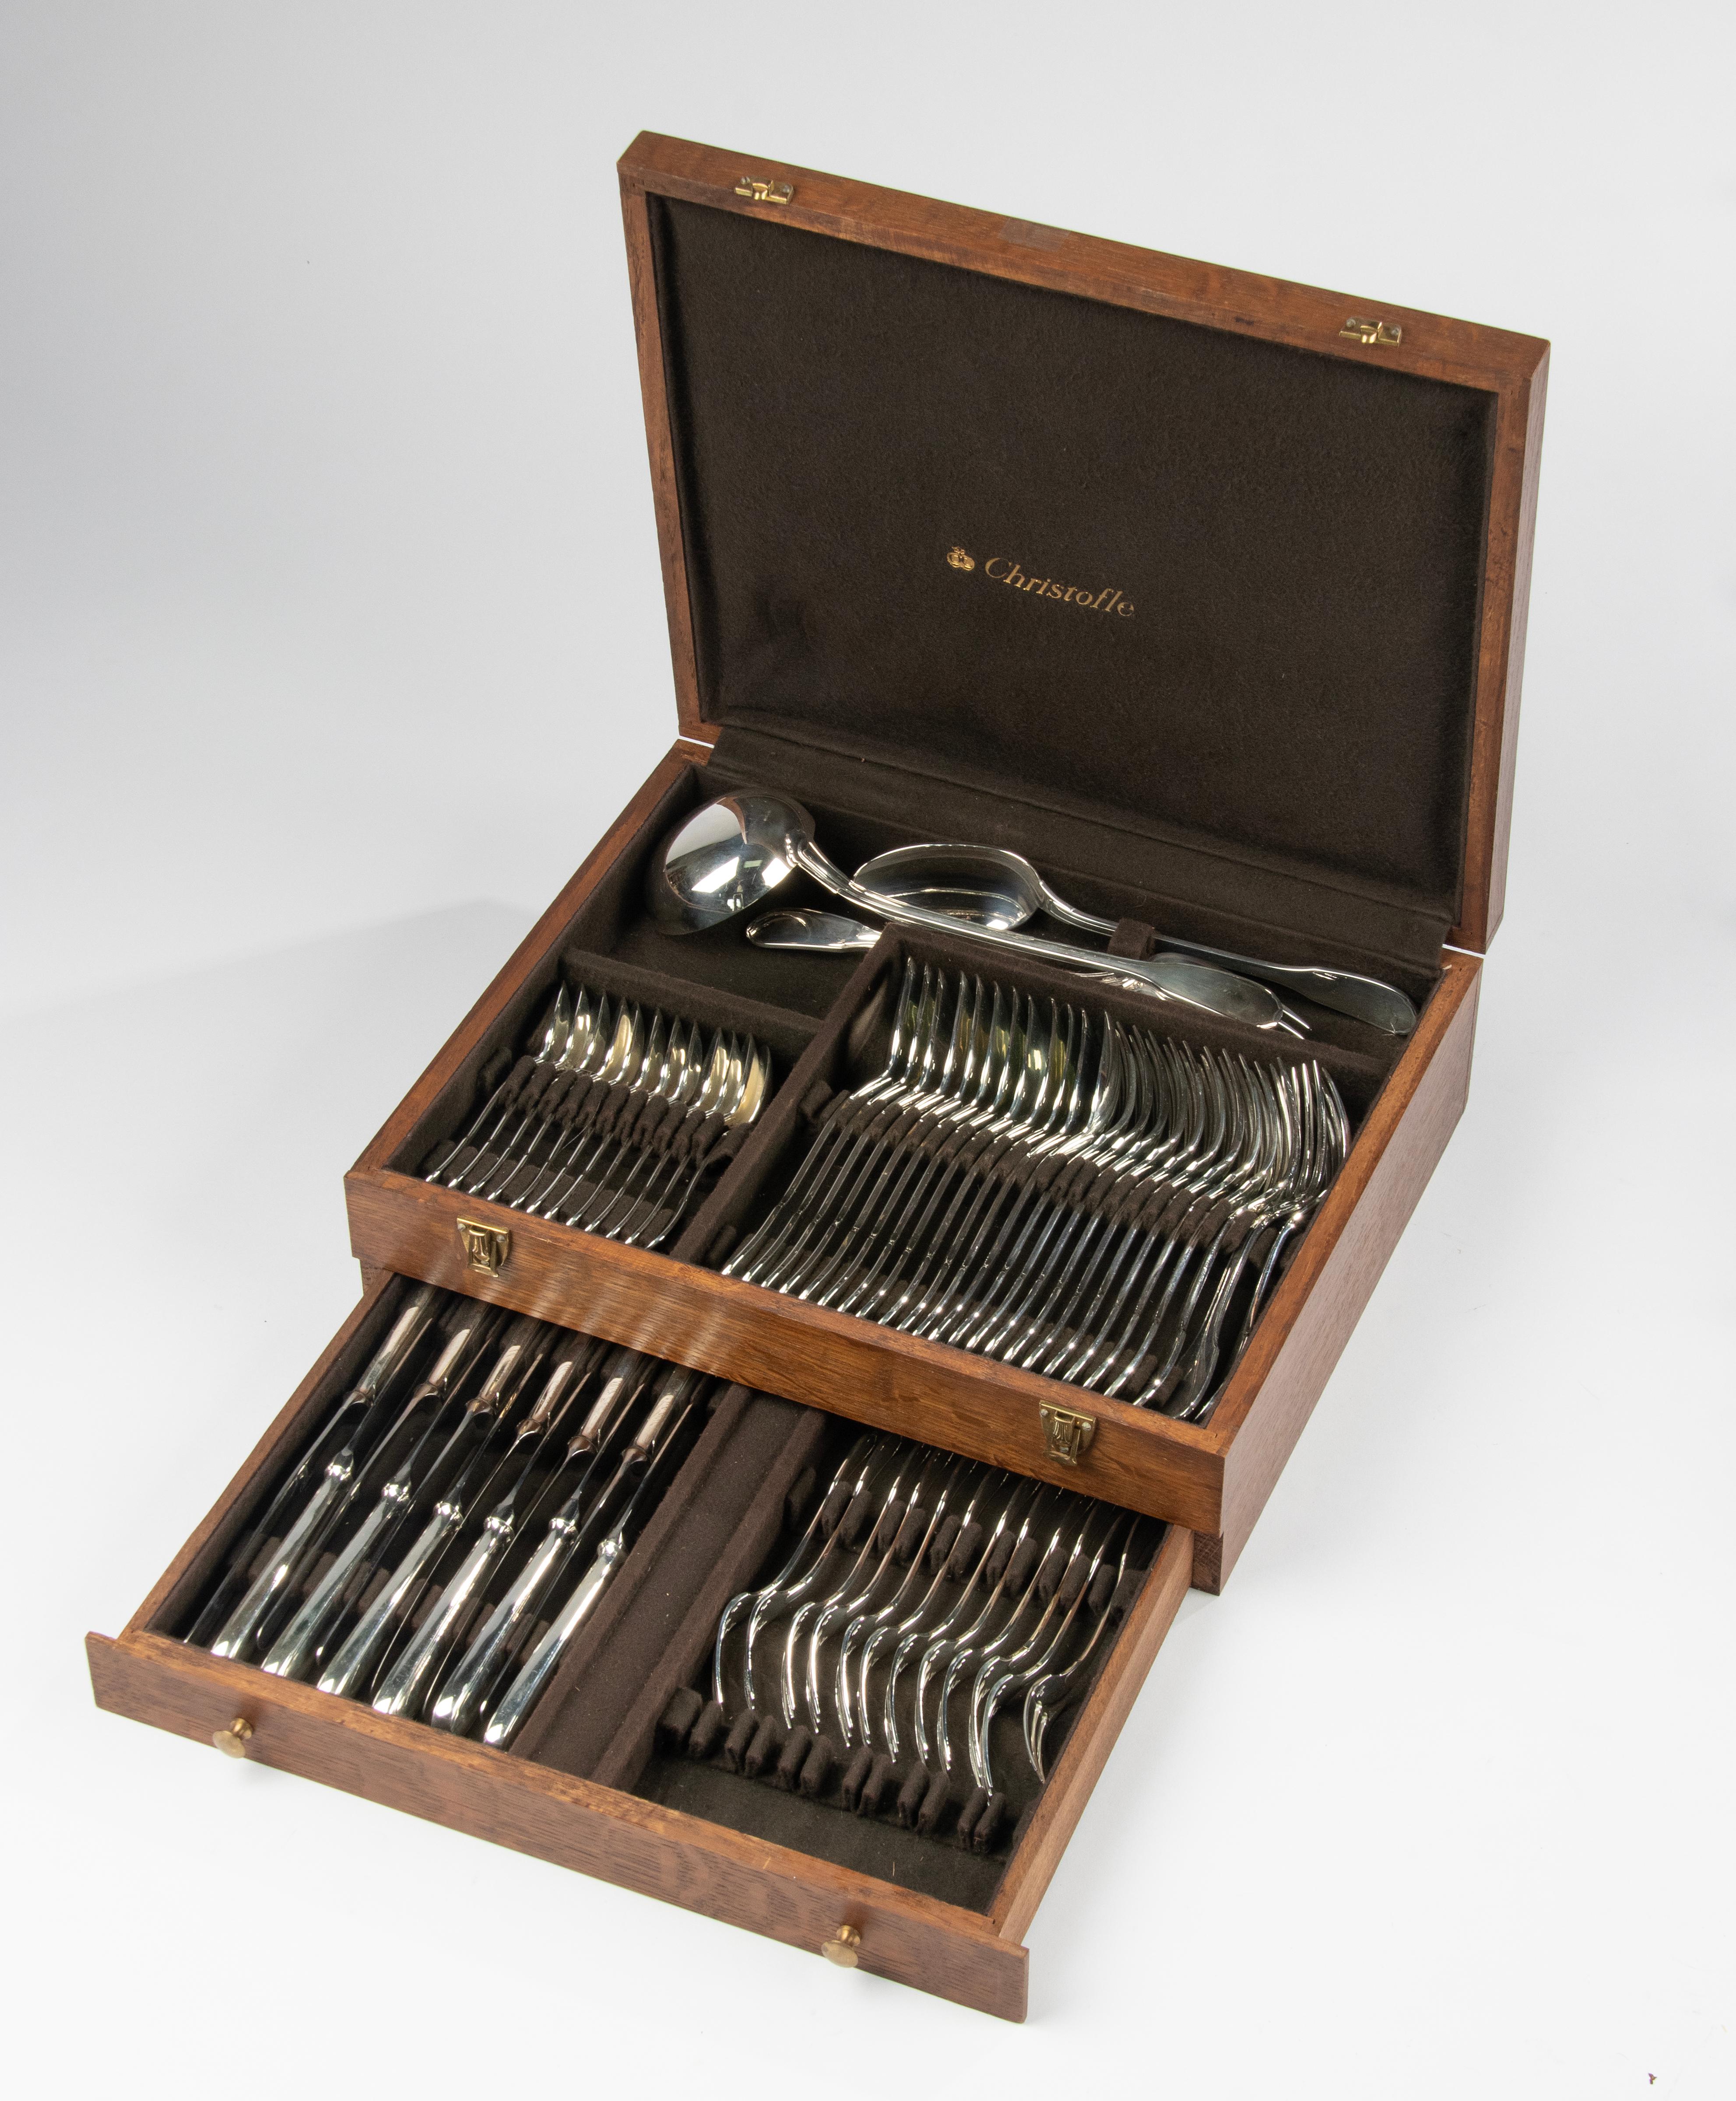 63-Piece Set Silver-Plated Flatware Made by Christofle, Model Versailles 1